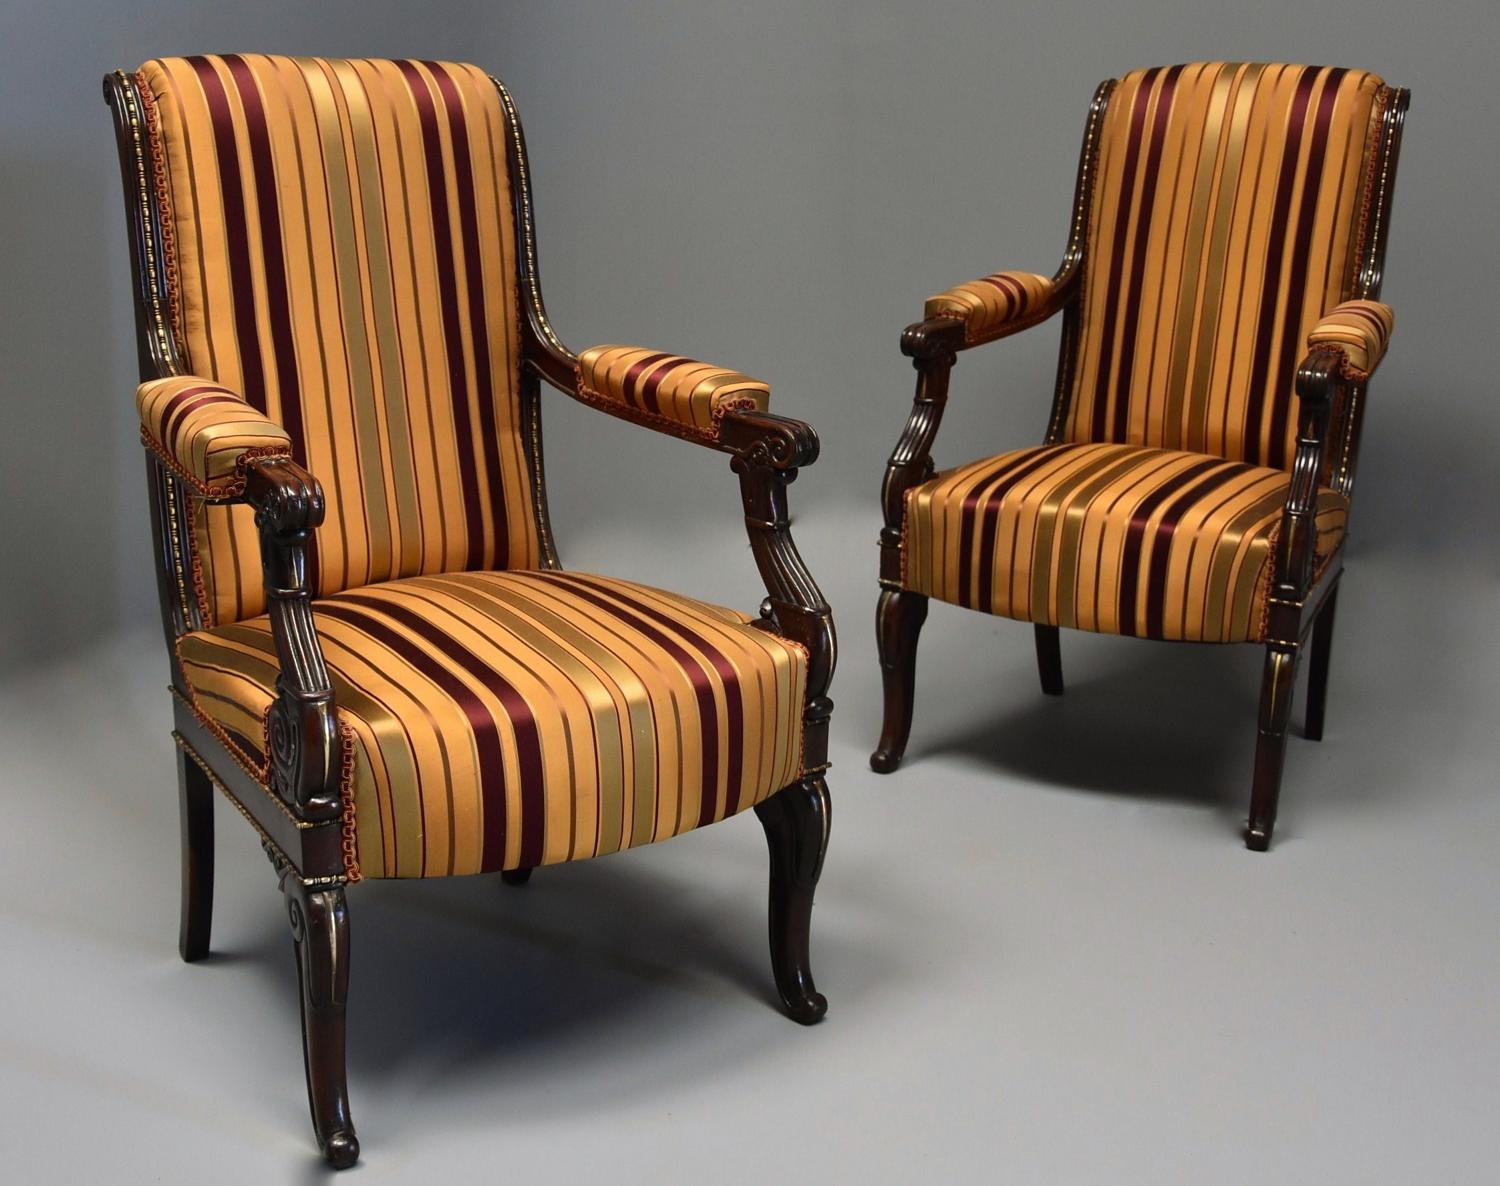 Pair of fine quality 19thc French Empire style rosewood open armchairs